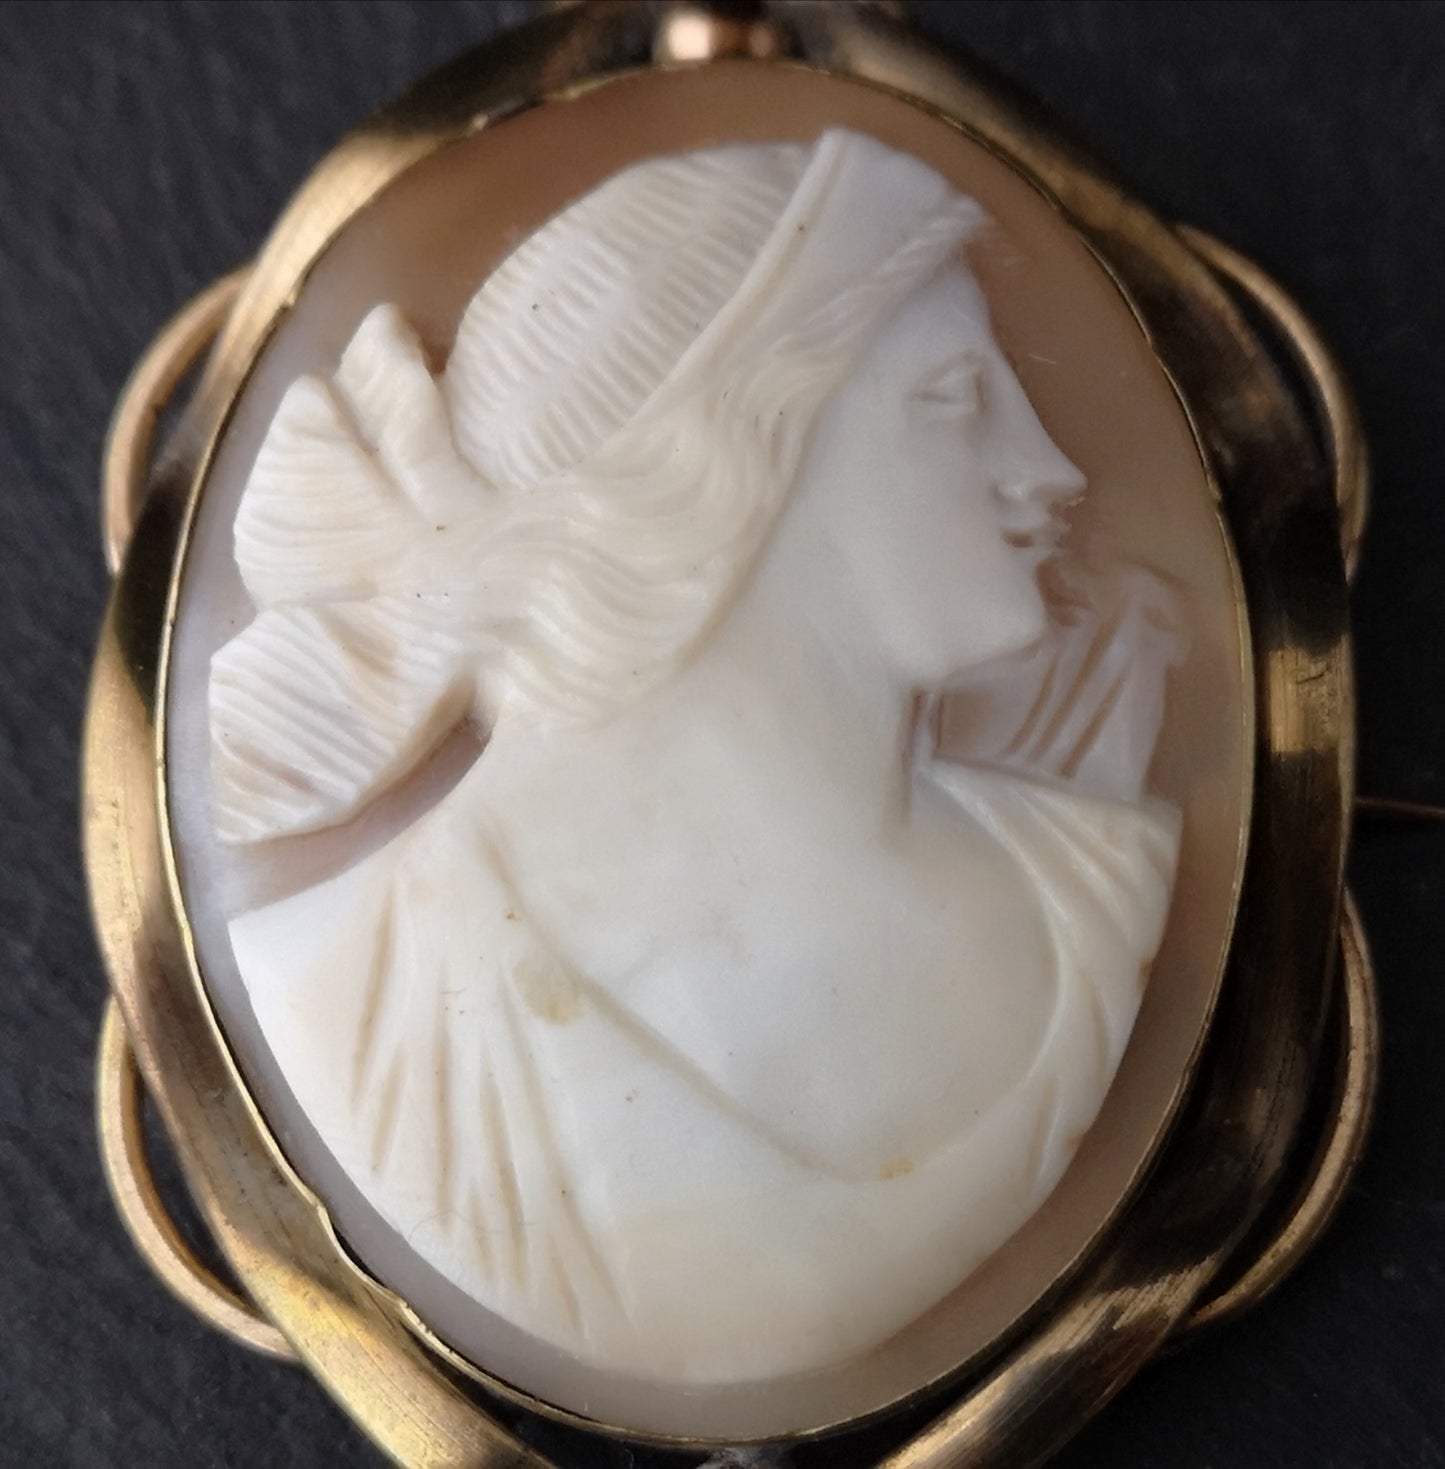 Antique Victorian cameo brooch, large